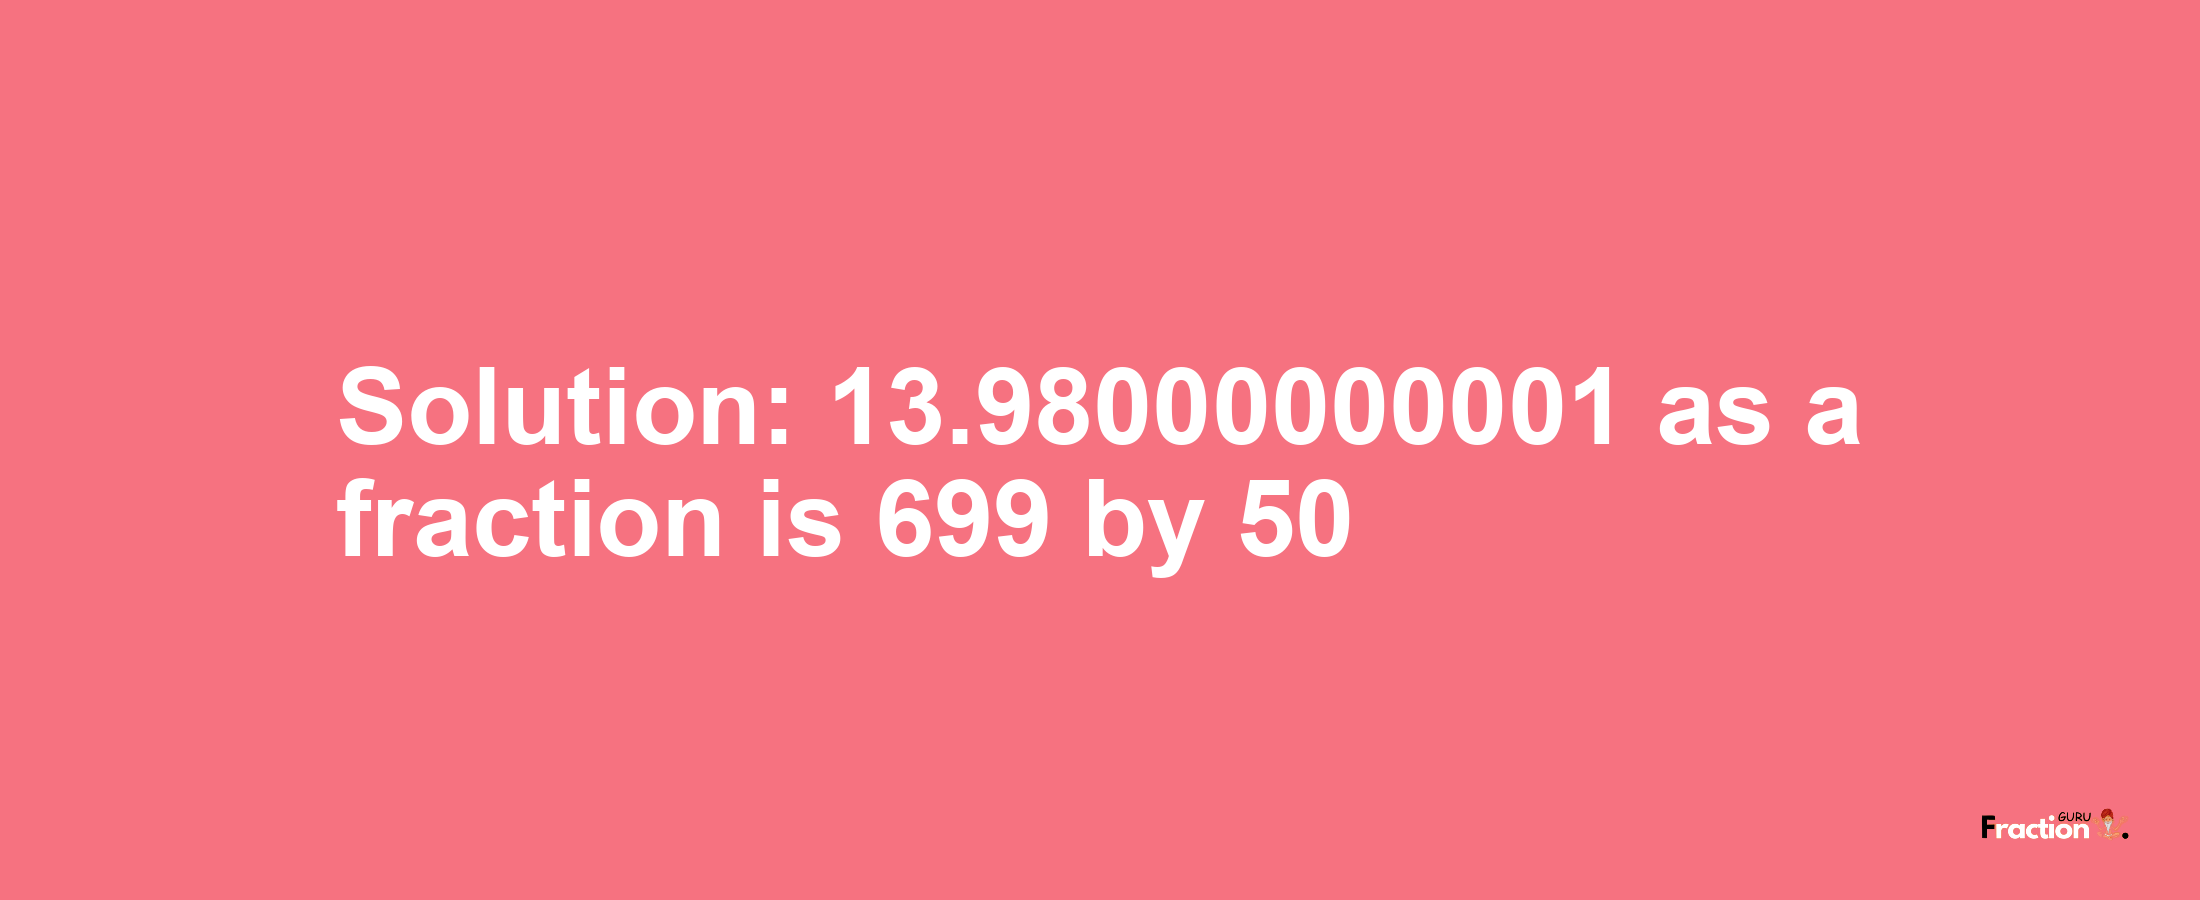 Solution:13.98000000001 as a fraction is 699/50